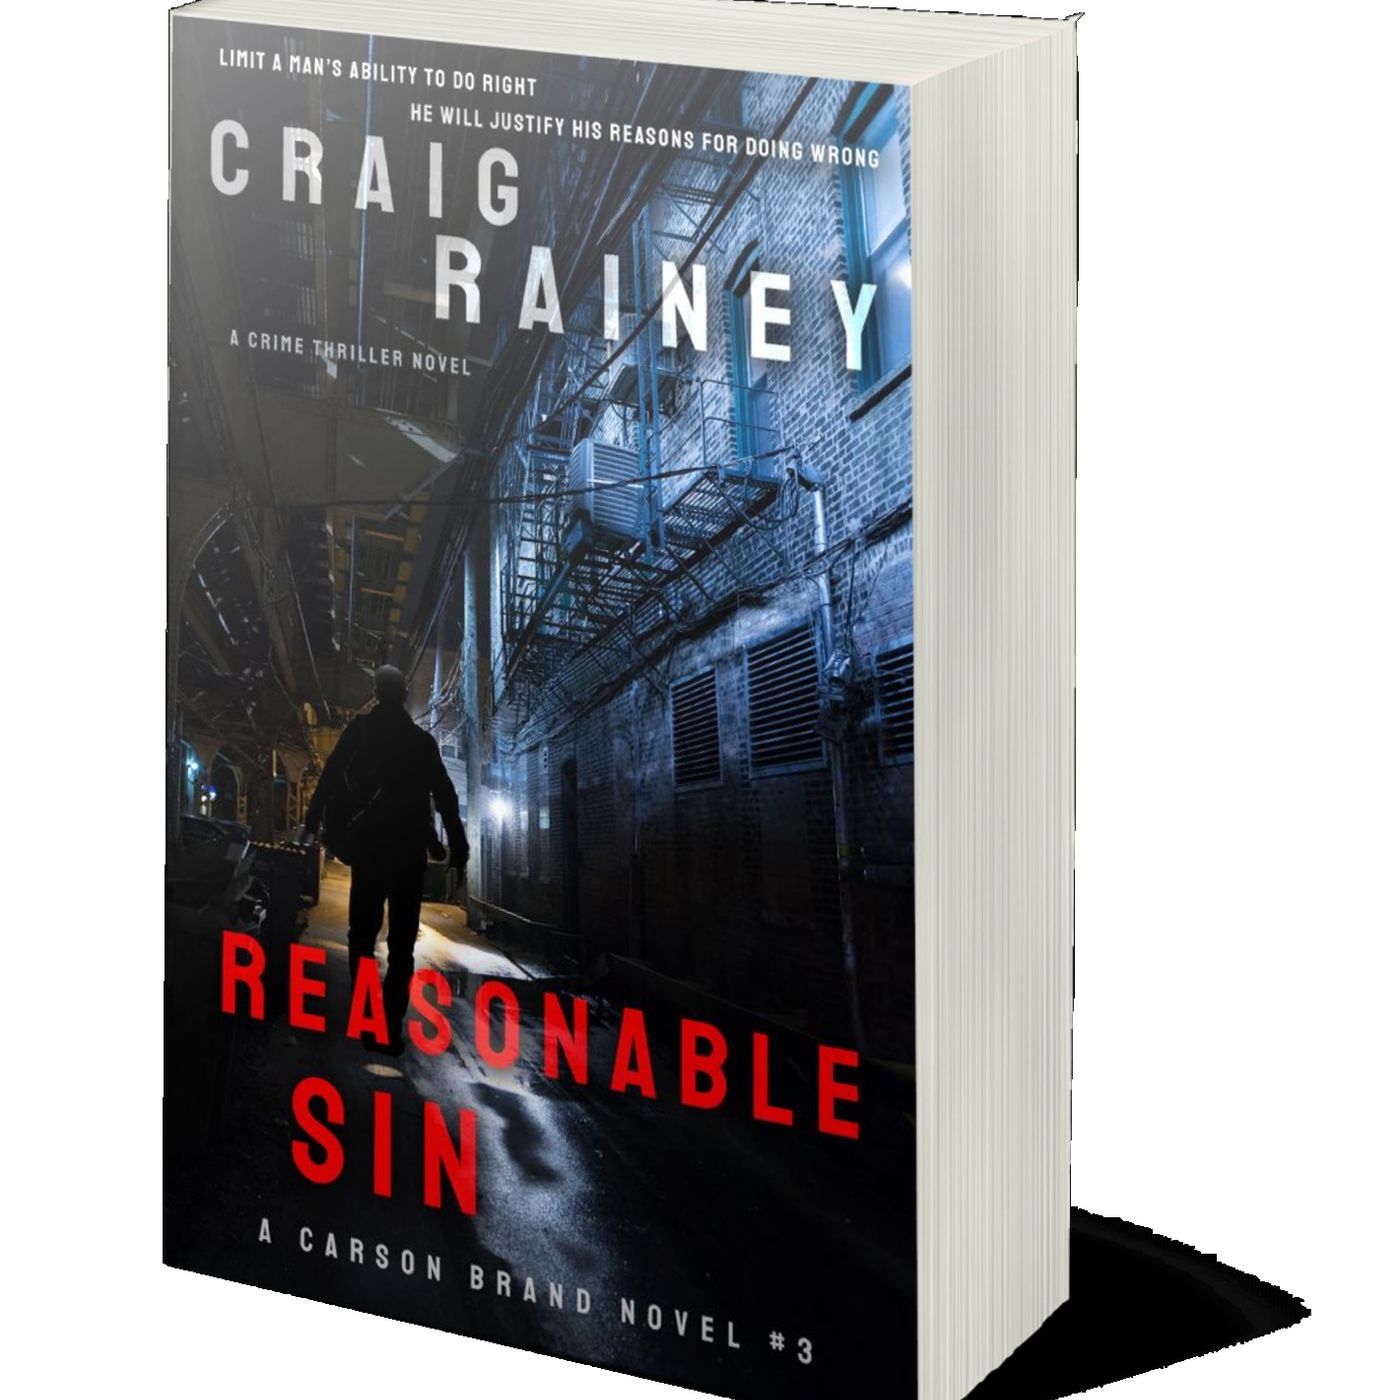 Reasonable Sin - 3rd Book in the Series and I have Plot Block!